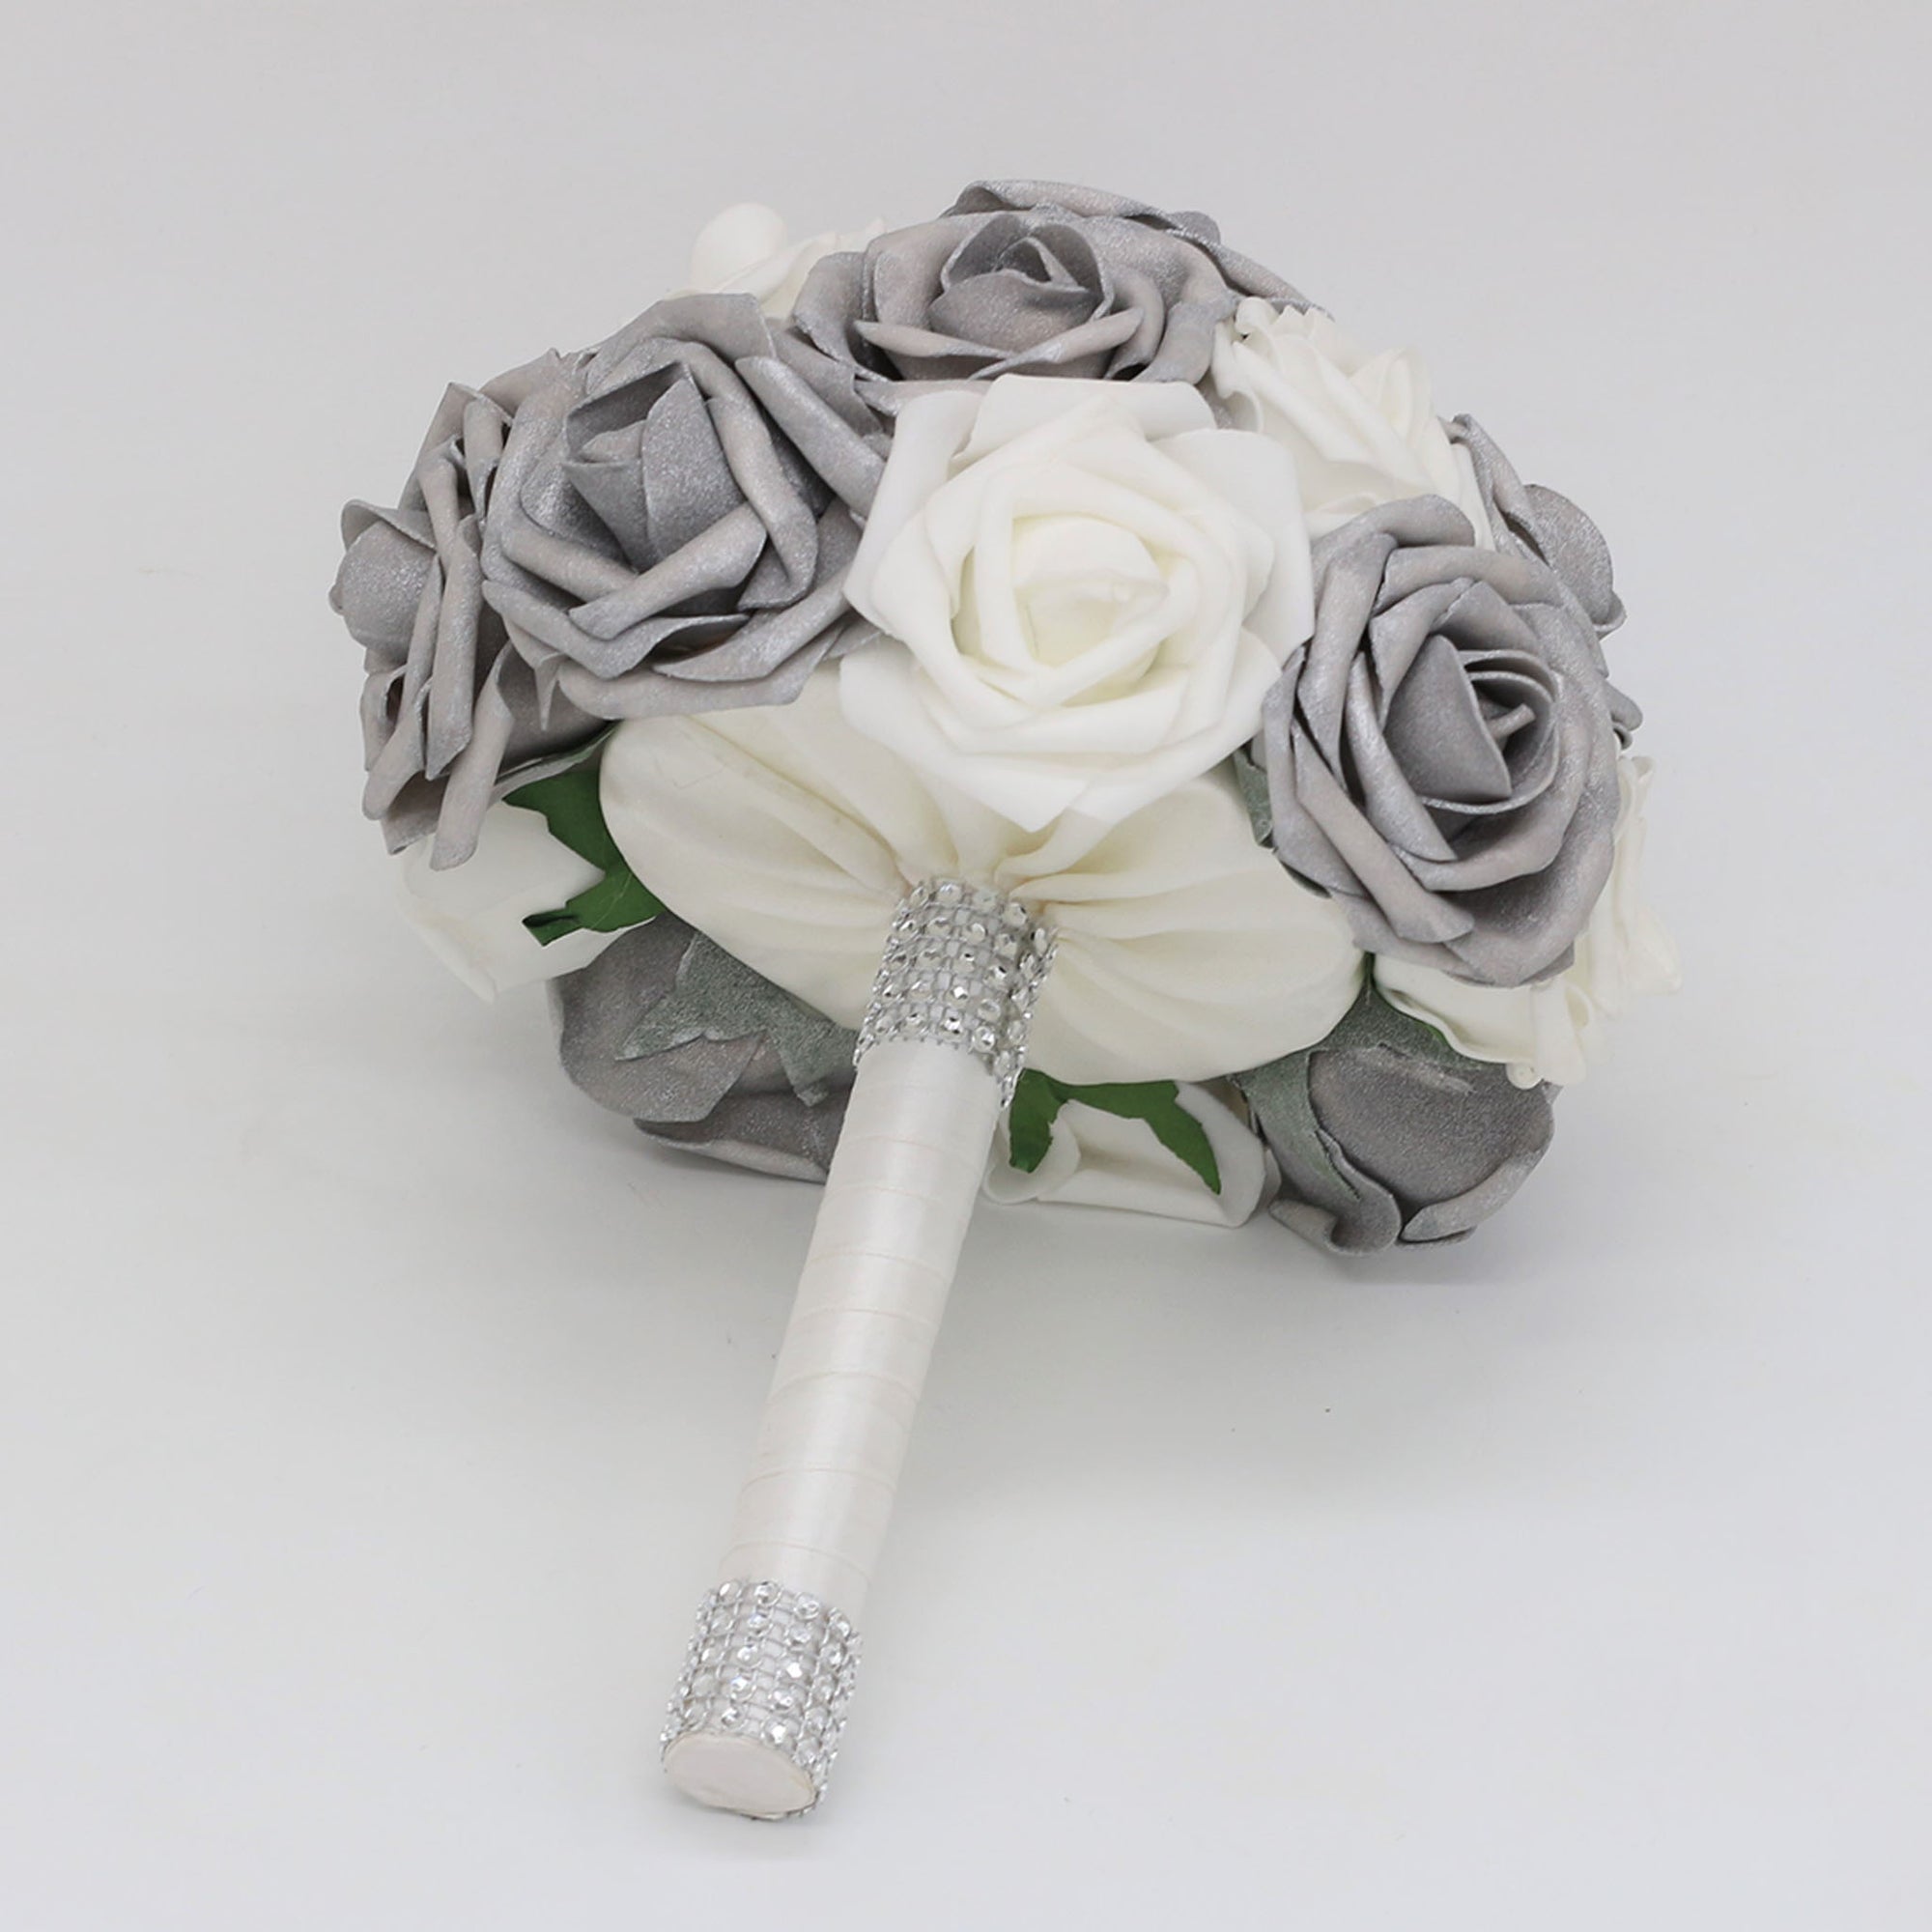 Silver White Bridal Flowers Wedding Bouquet of Roses Bride Bridesmaid